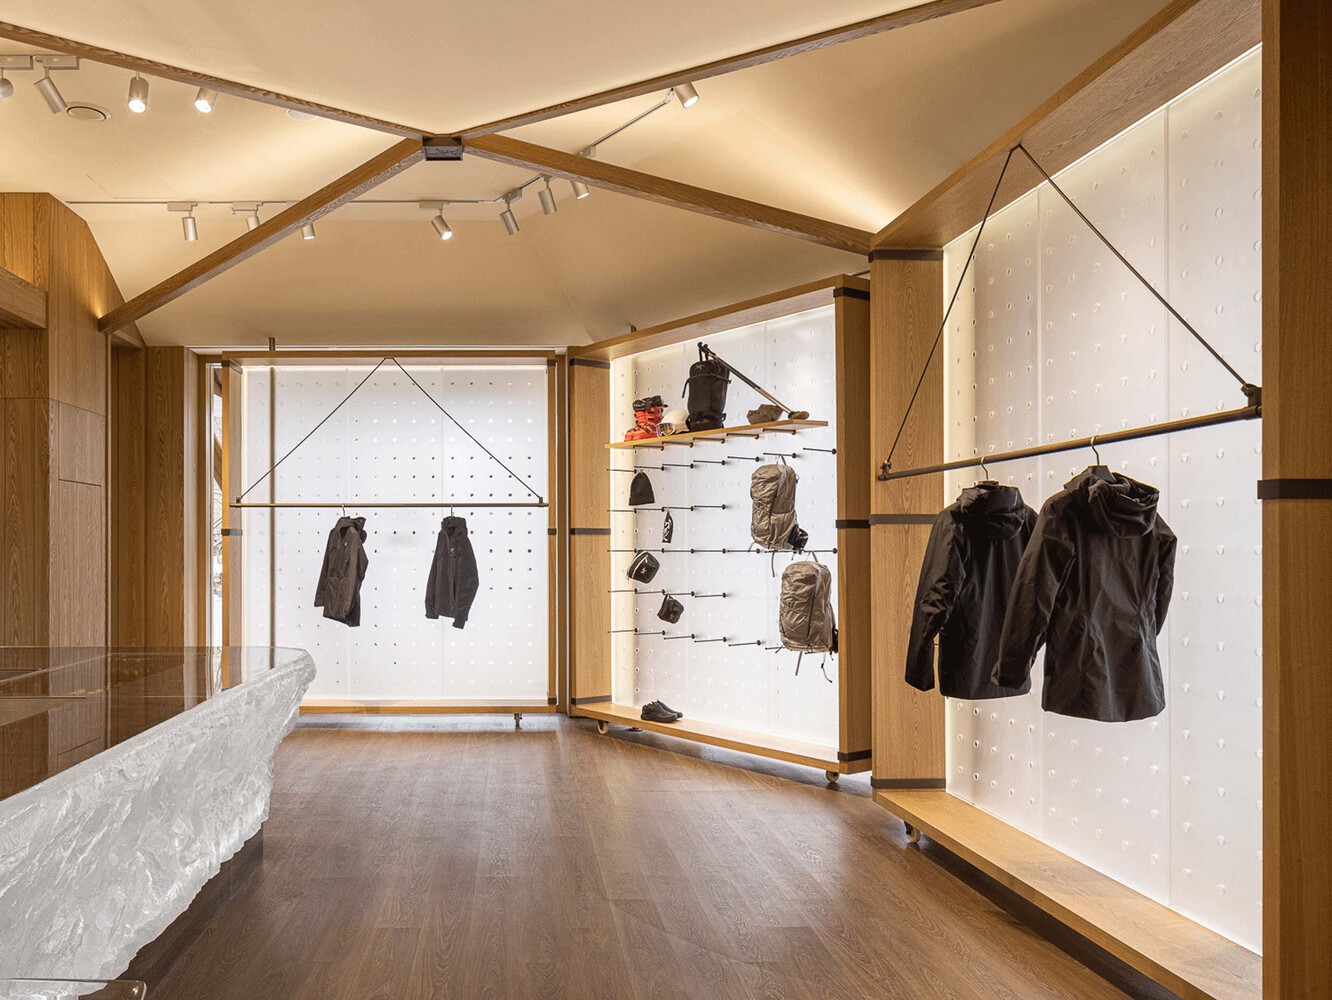 The Interior of Arc’teryx Store in China